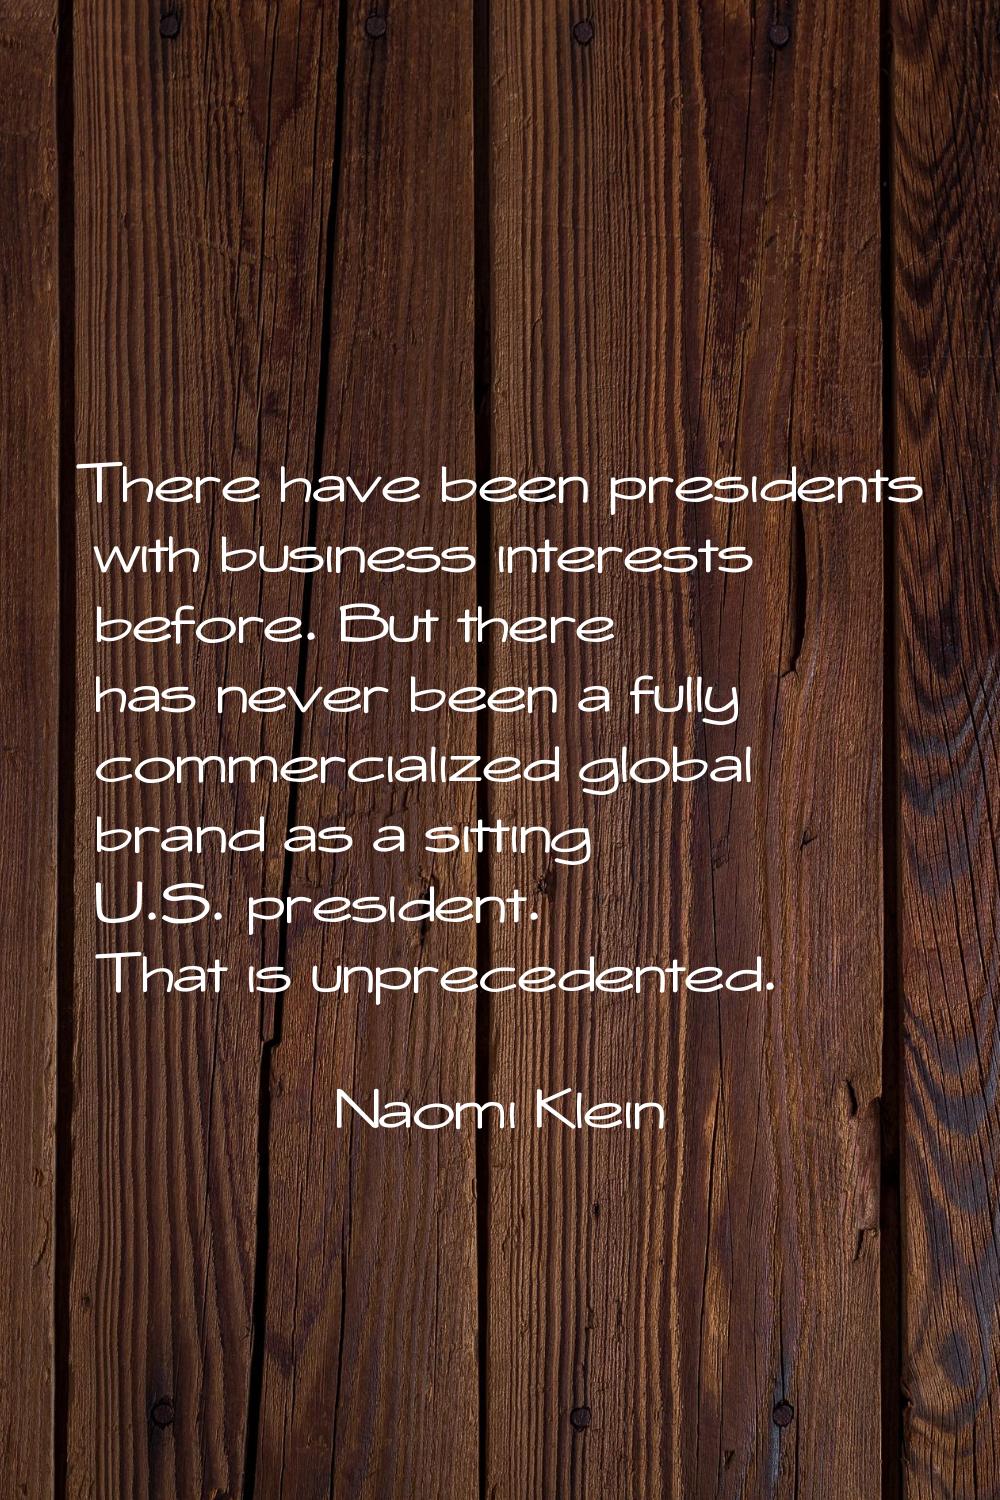 There have been presidents with business interests before. But there has never been a fully commerc